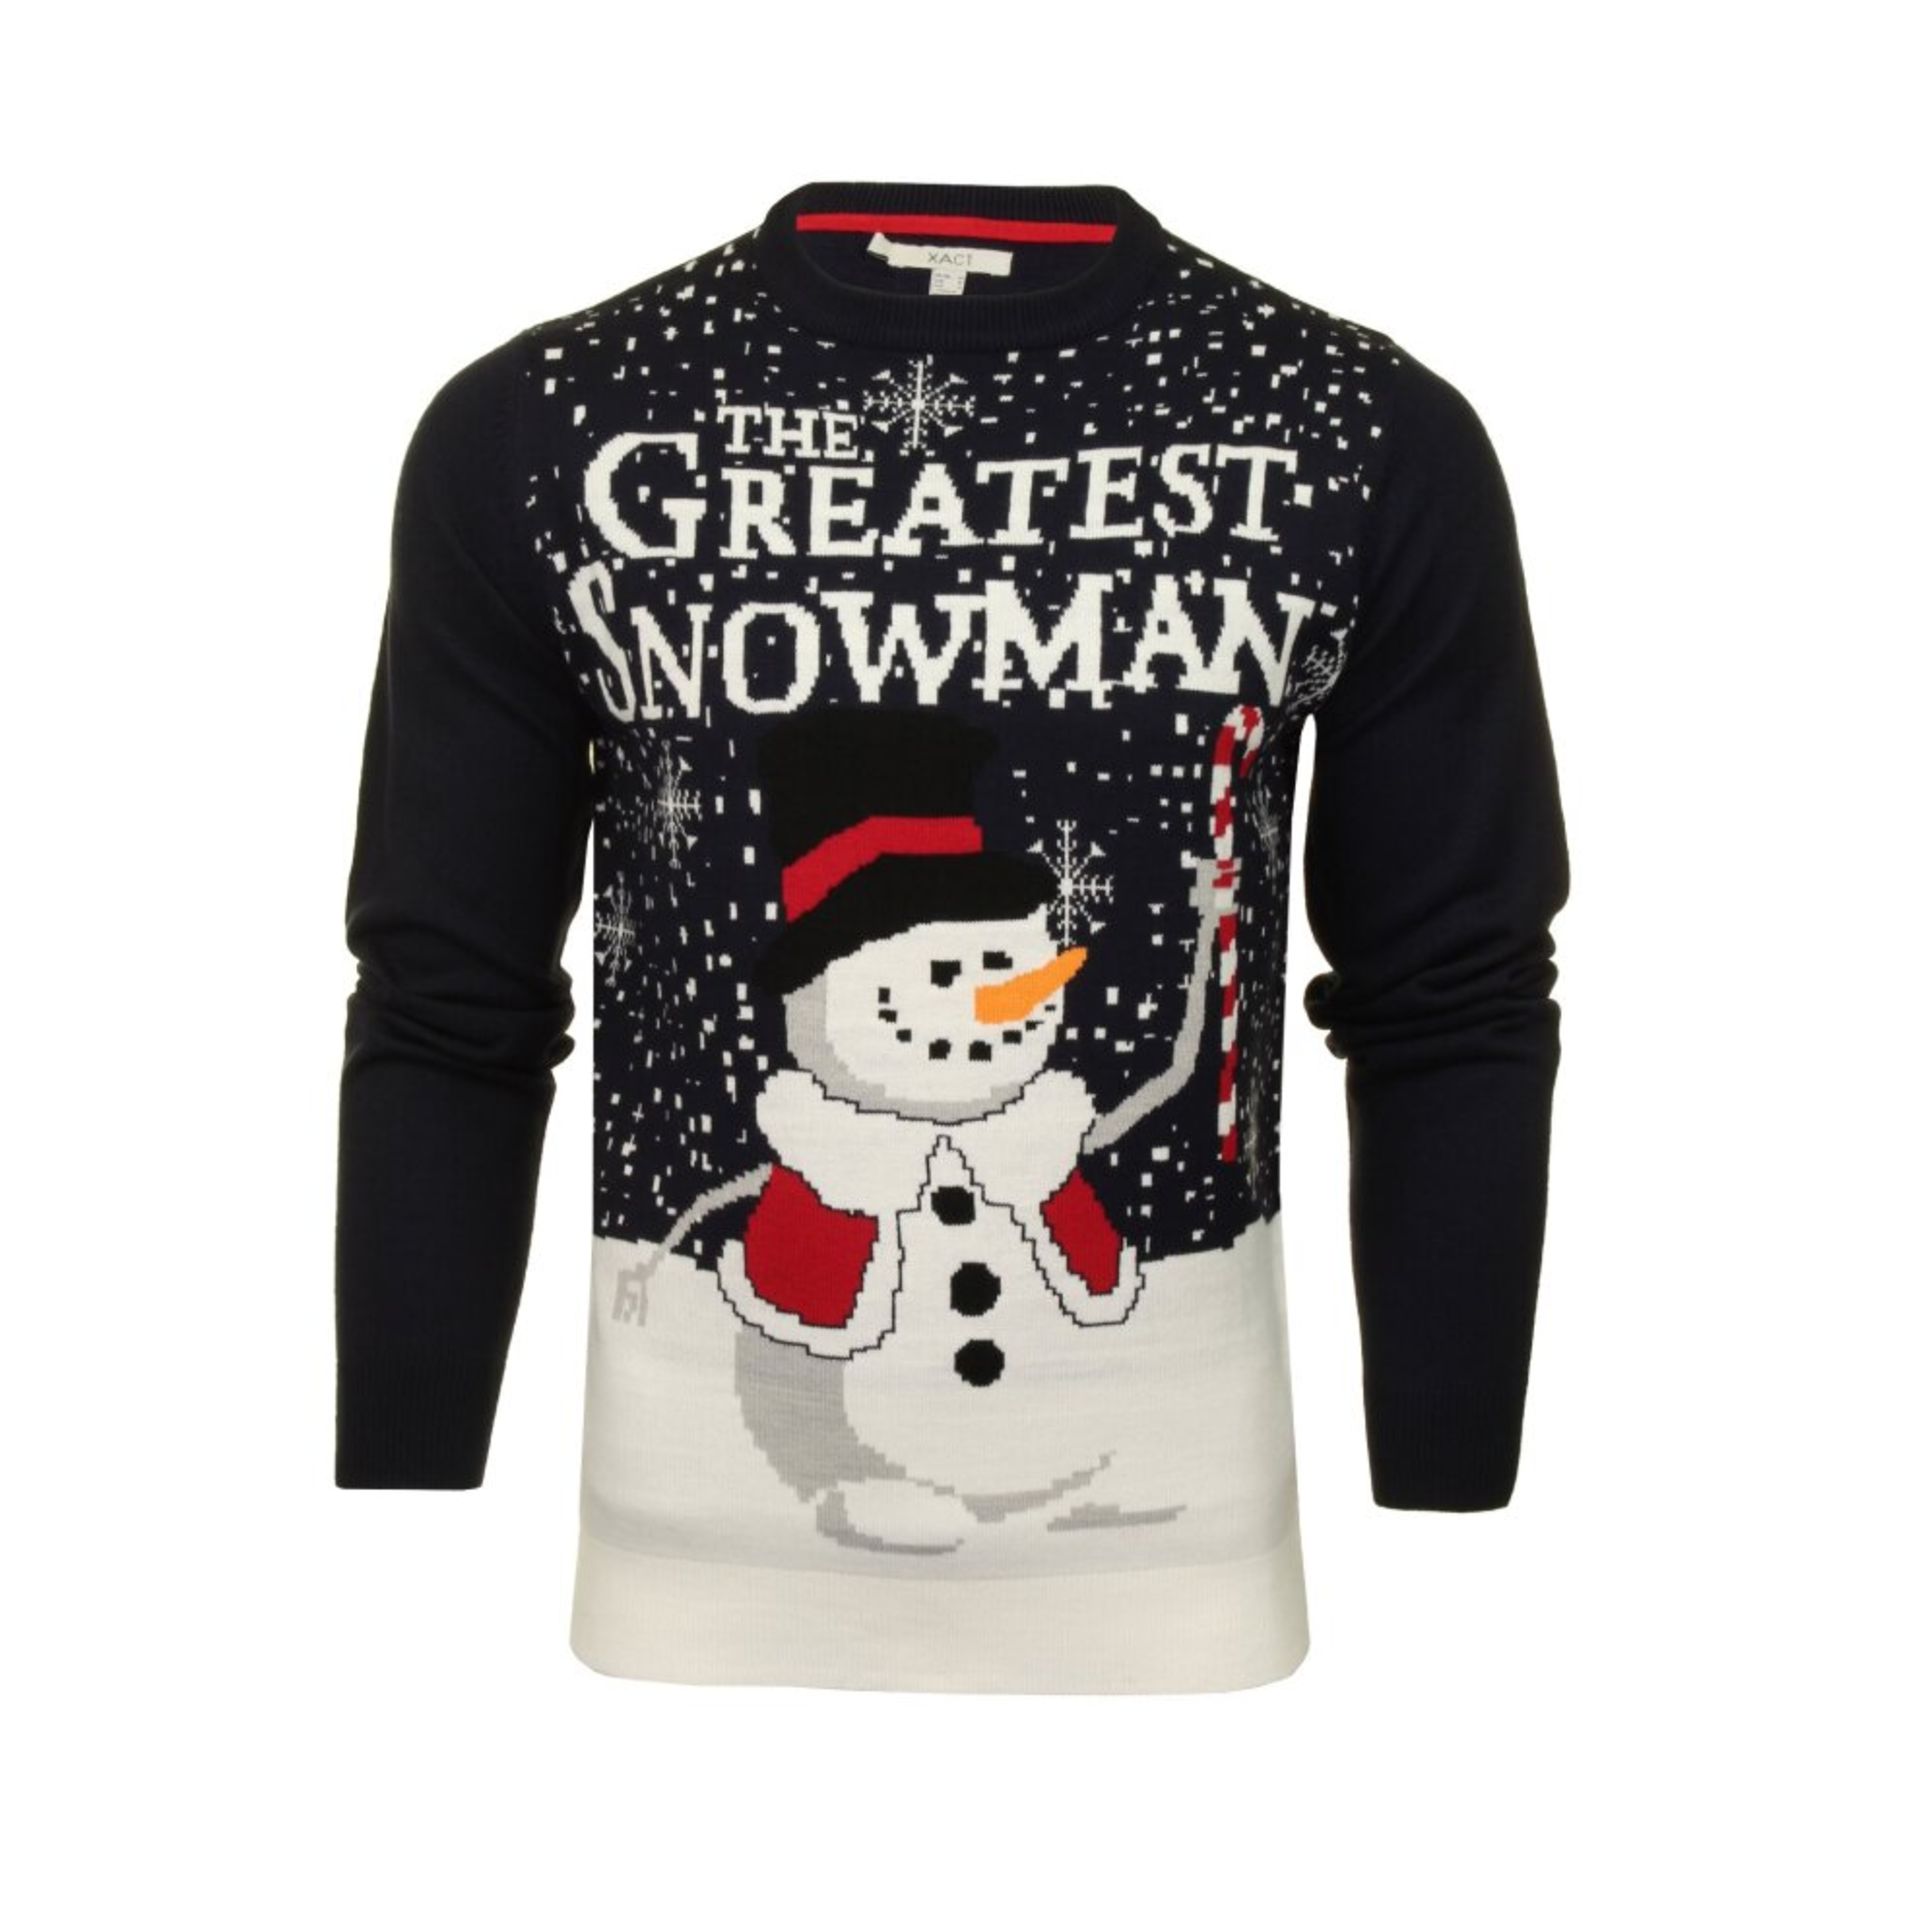 23 X BRAND NEW NOVELTY FESTIVE JUMPERS IE. THE GREATEST SNOWMAN (L-11, M-12)